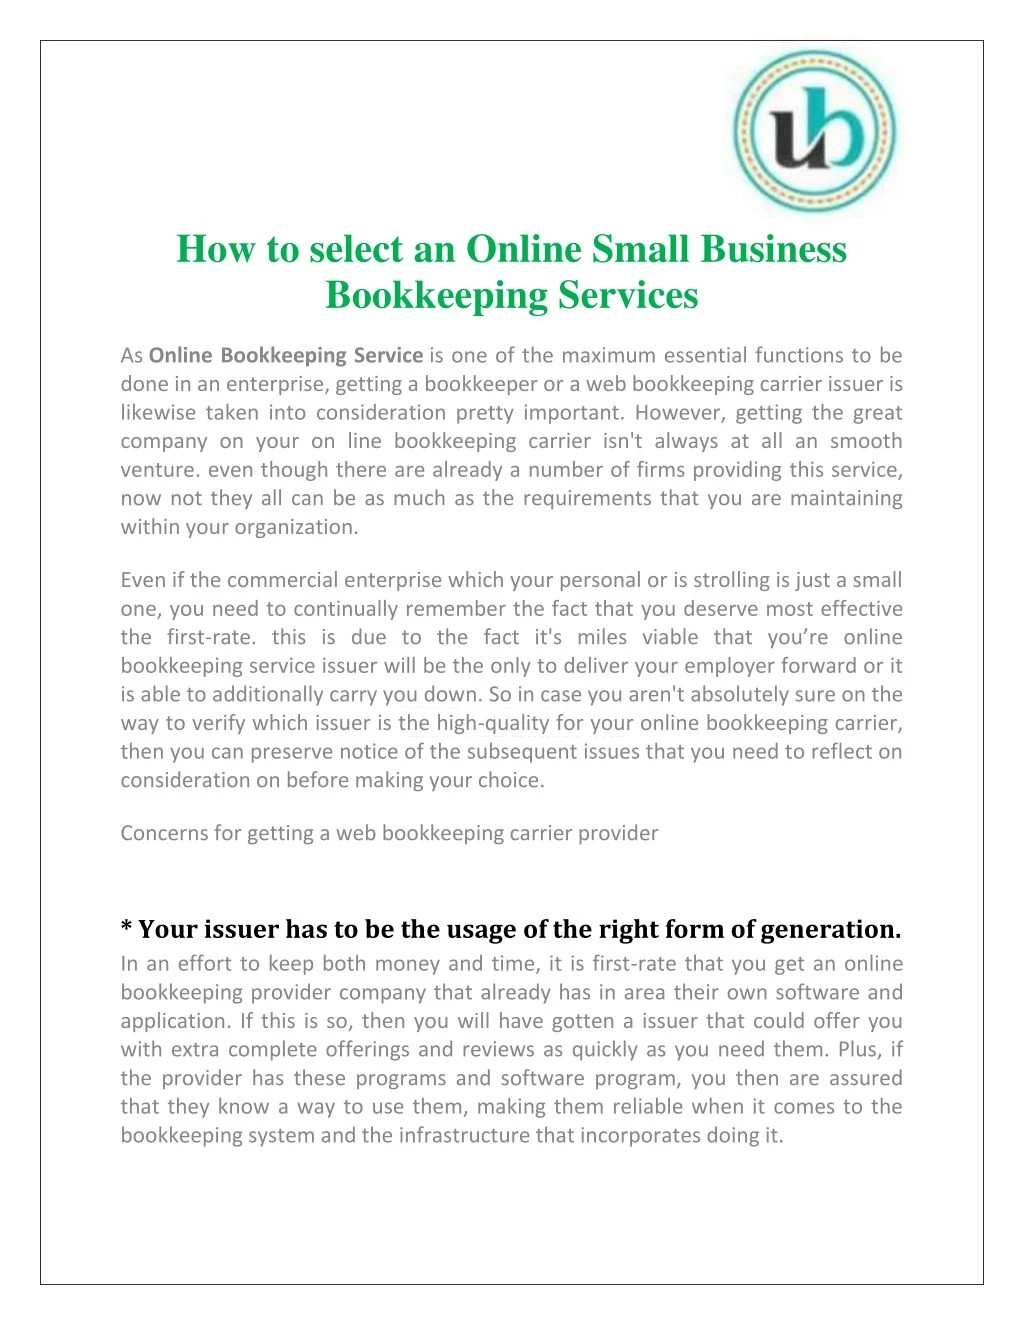 how to select an online small business